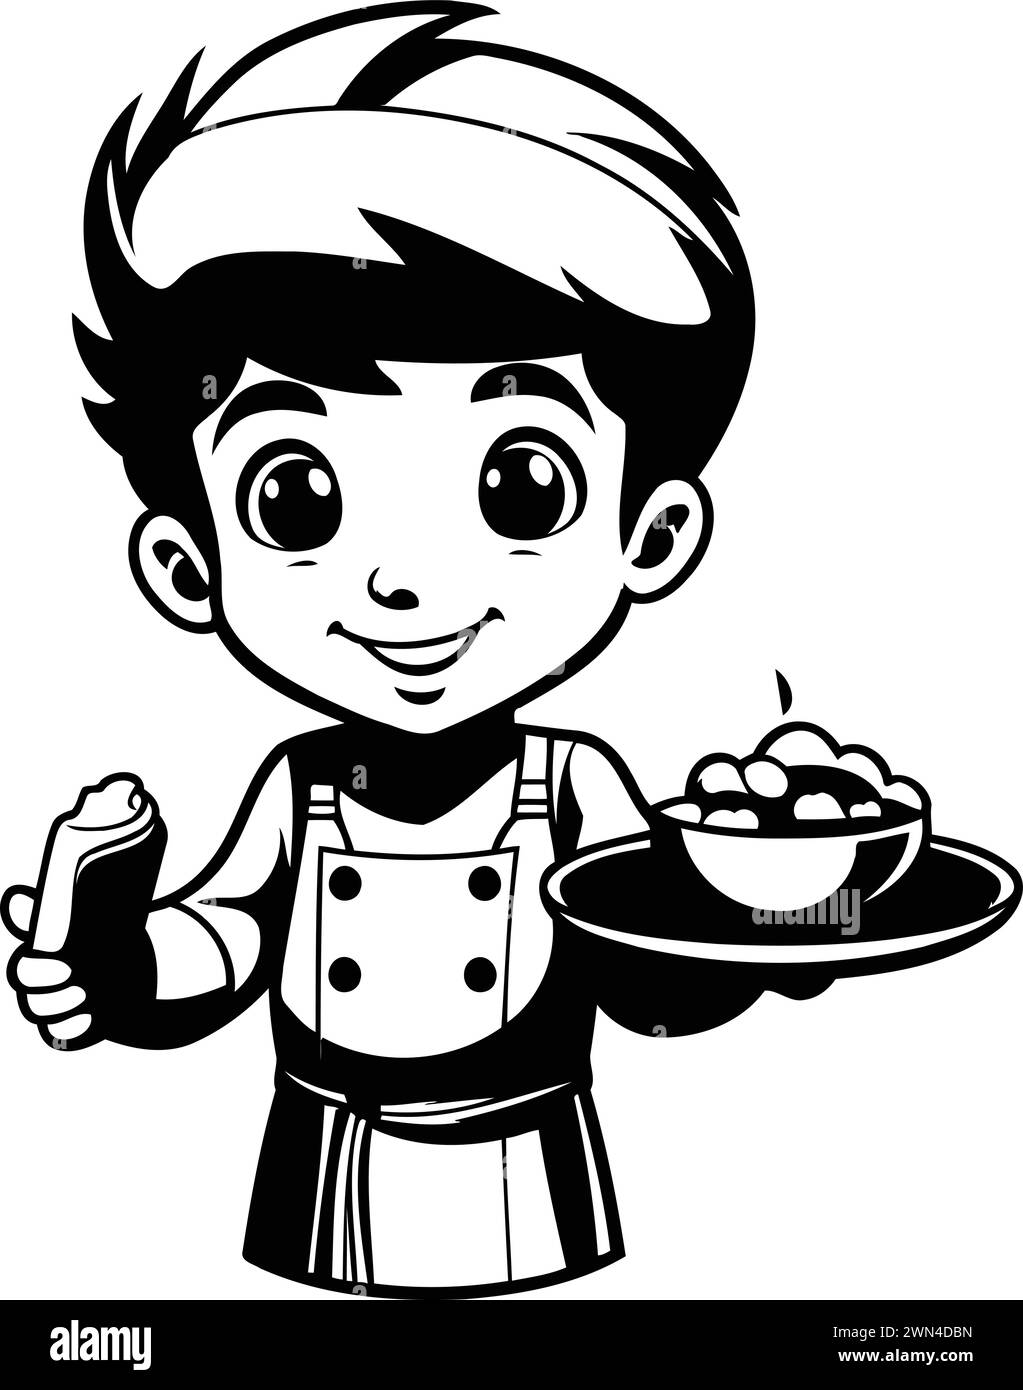 Cute cartoon chef with a plate of food. Vector illustration. Stock Vector